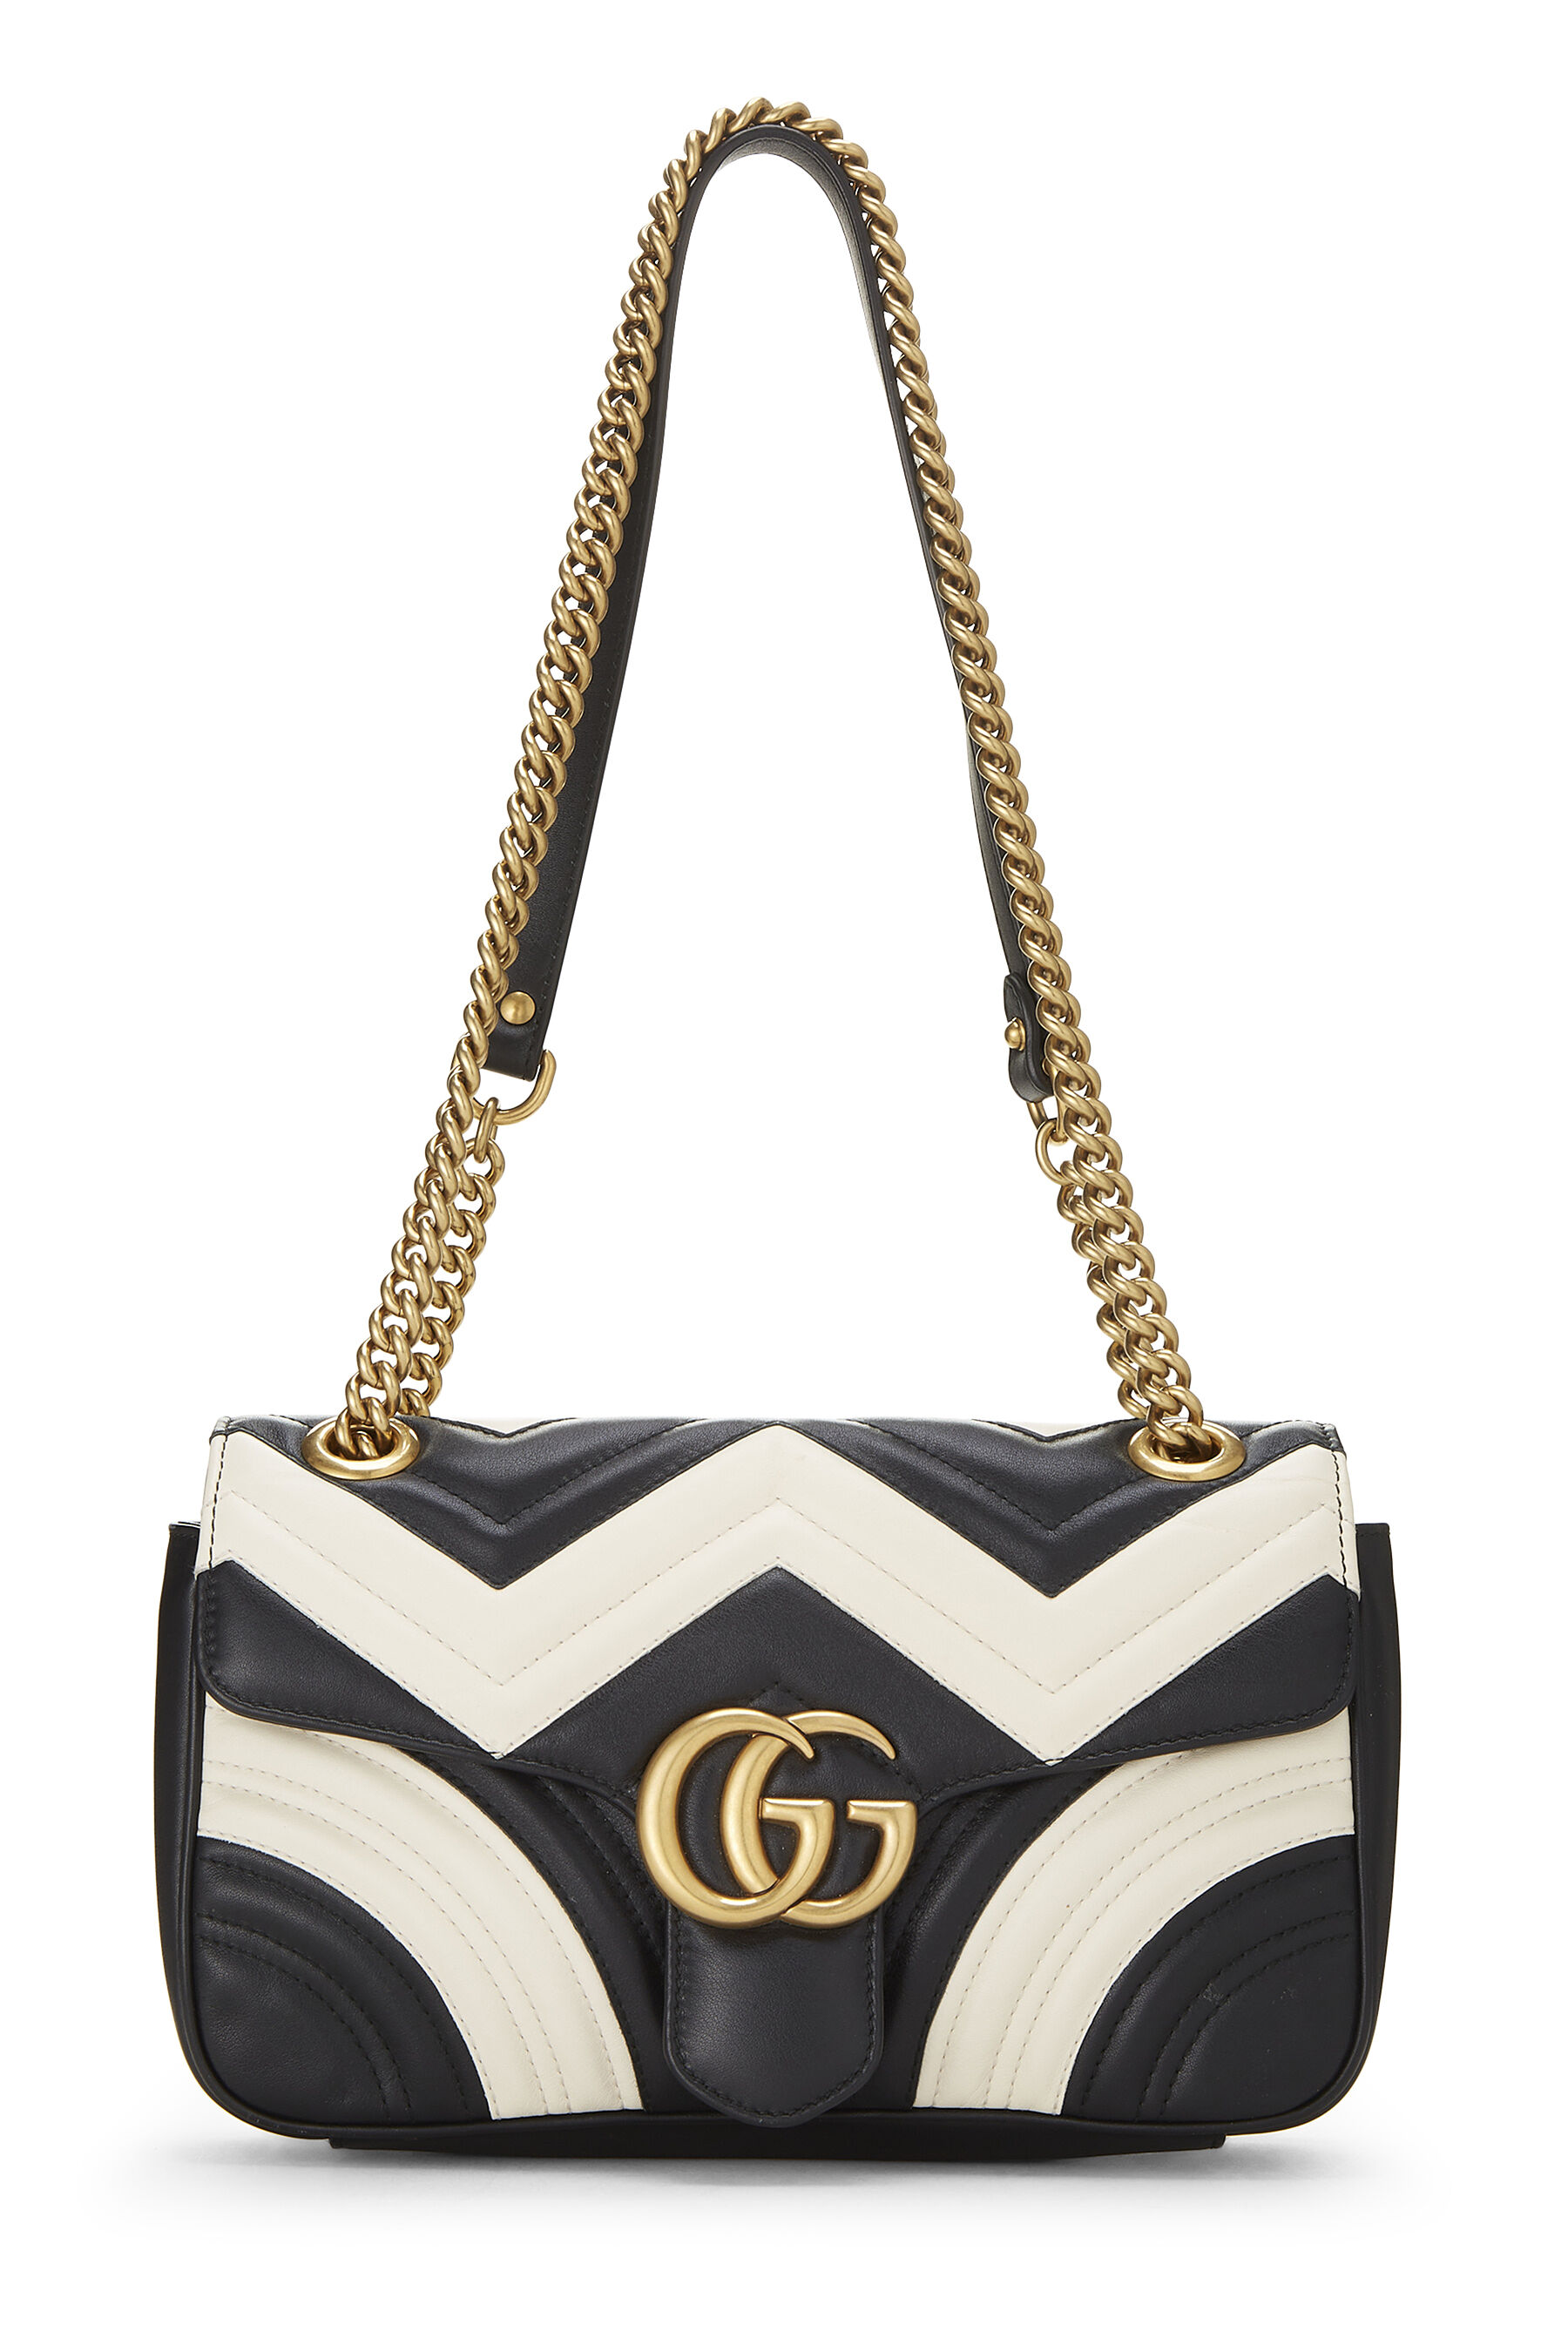 Gucci Black & White Leather GG Marmont Shoulder Bag Small